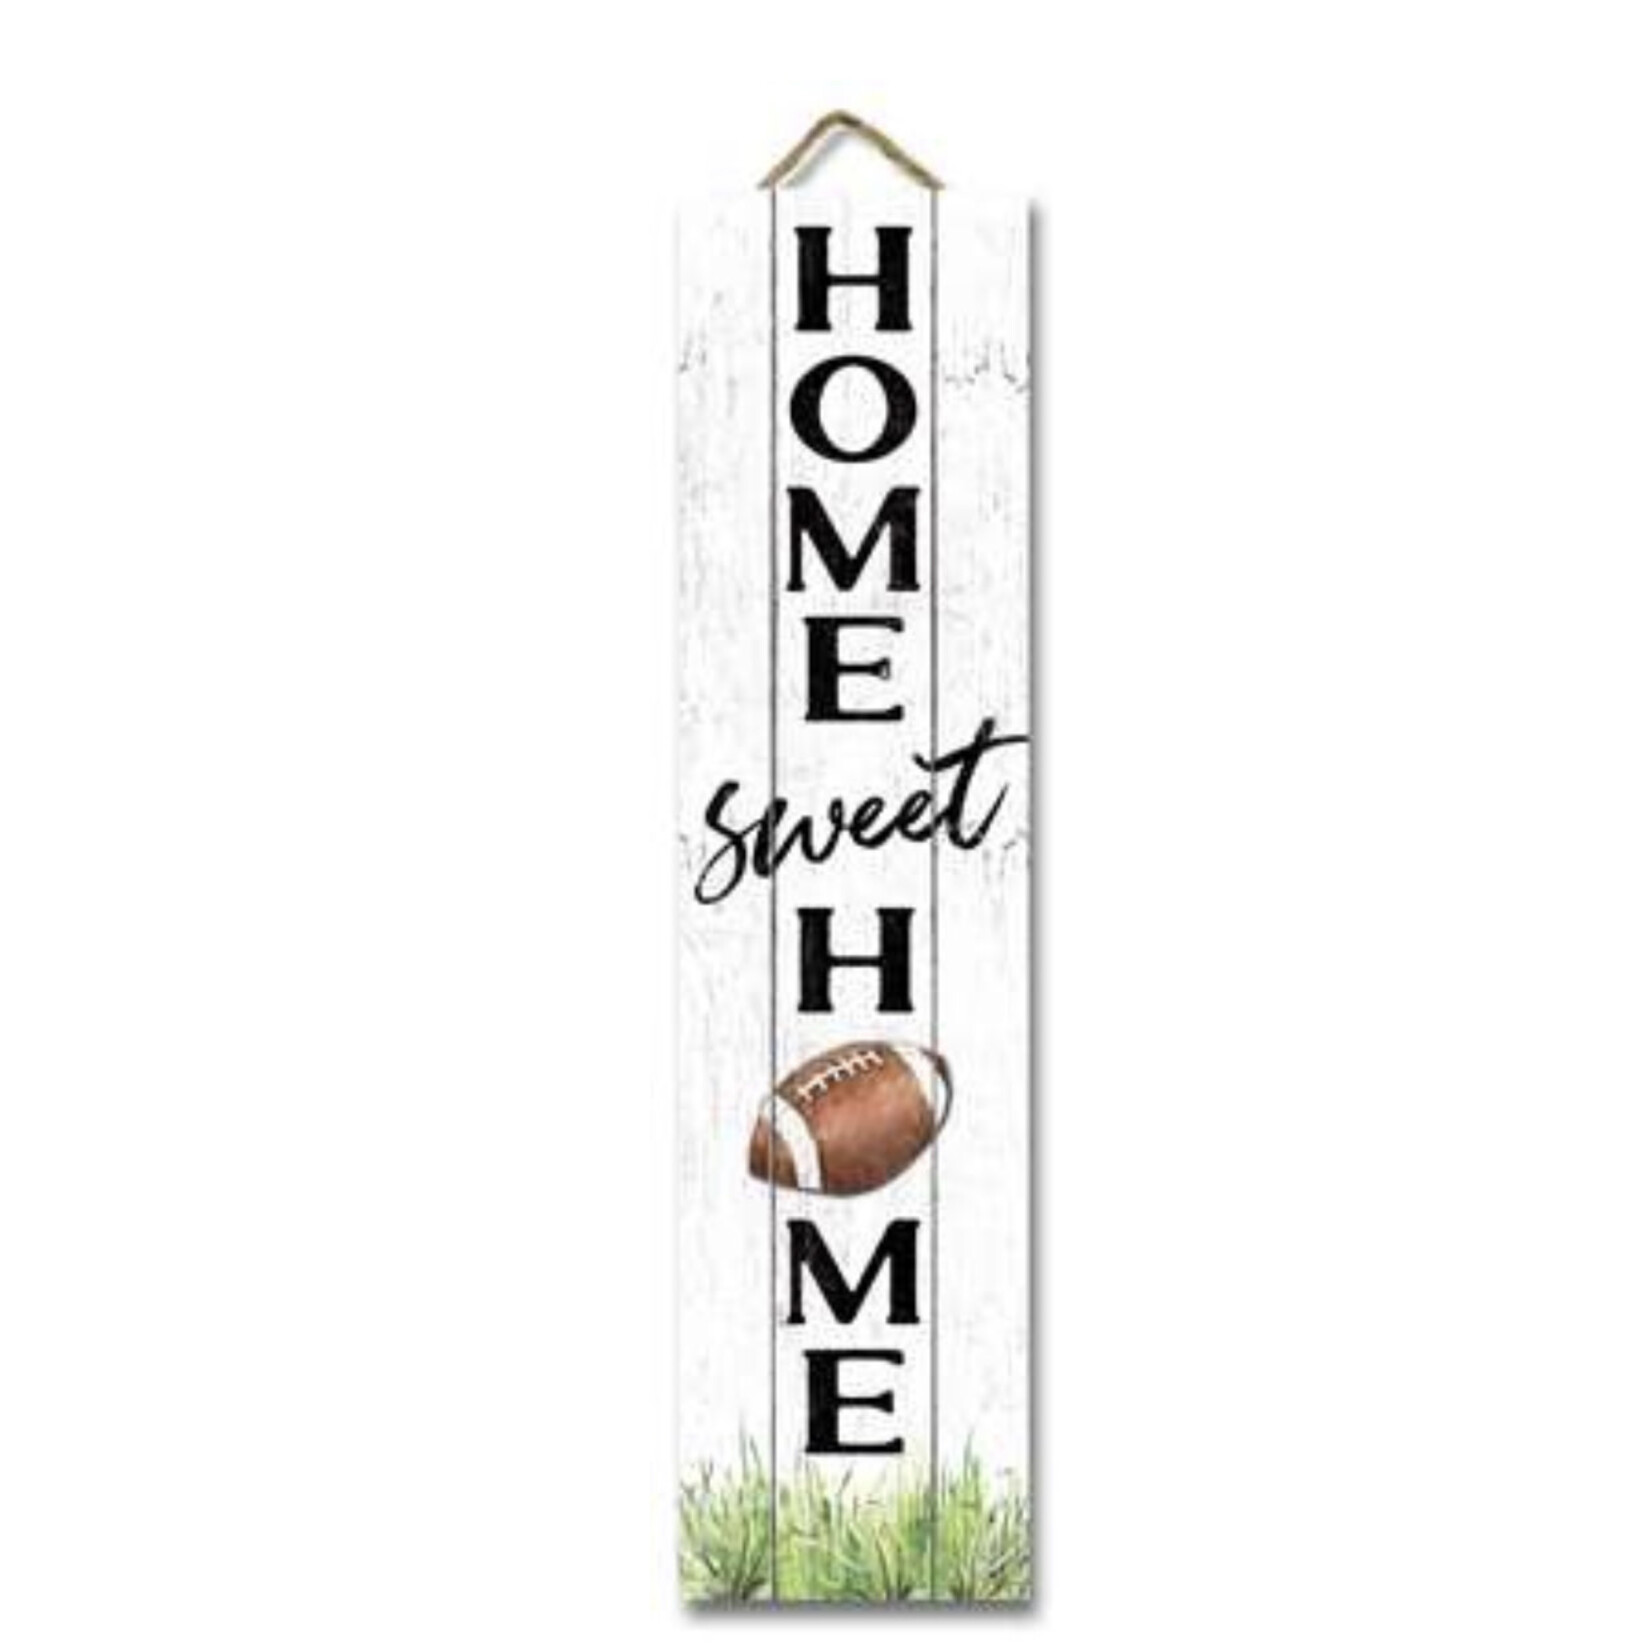 My Word! Home Sweet Home w/ Football Stand Out Tall Sign